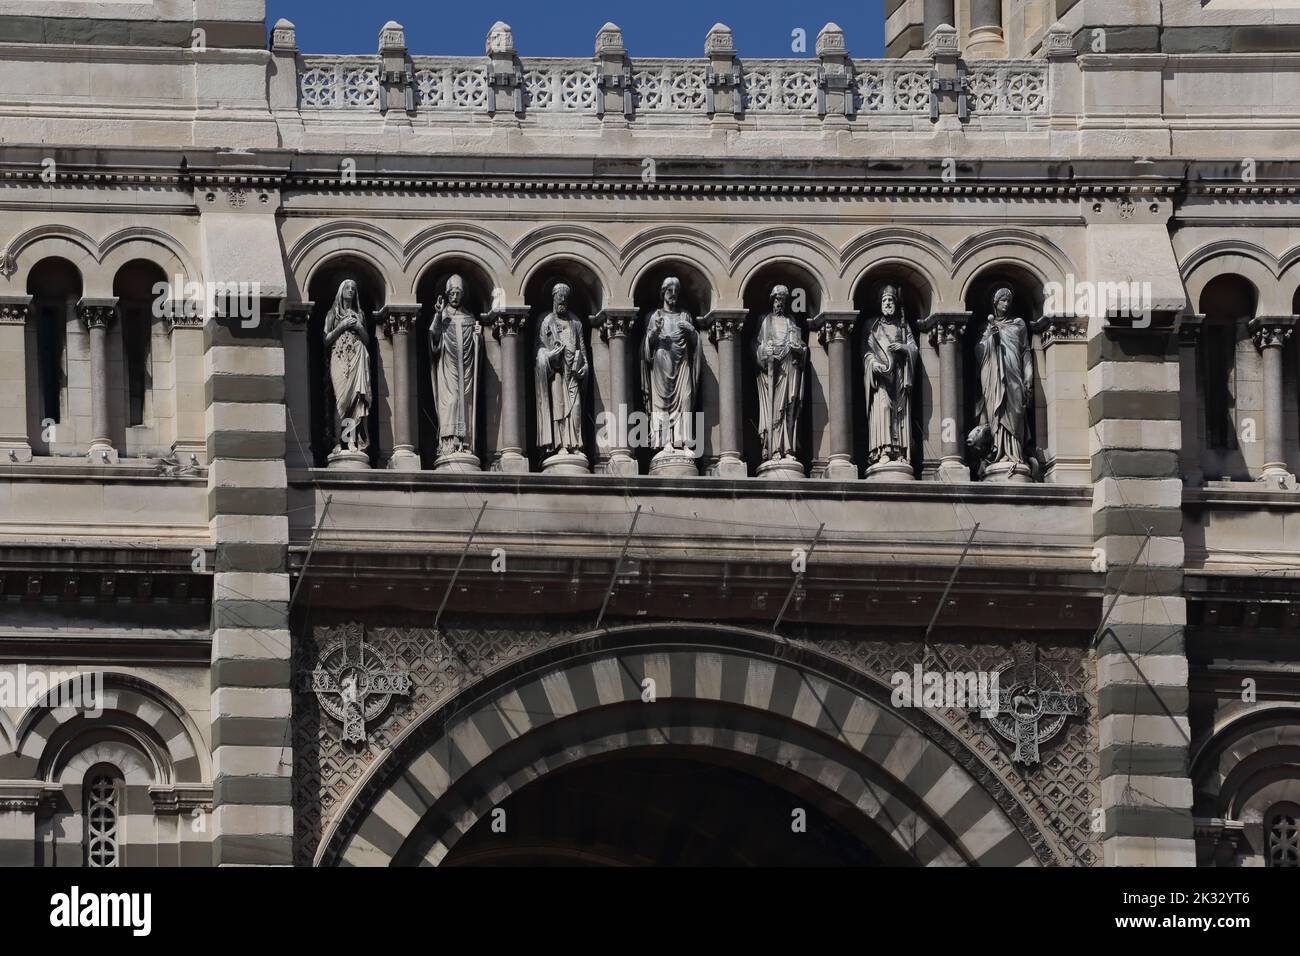 Cathedrale Sainte-Marie-Majeure (Cathedral of Saint Mary Major) Seven Statues Above Archway Represent Jesus Christ Surrounded by Apostles Peter, Paul Stock Photo